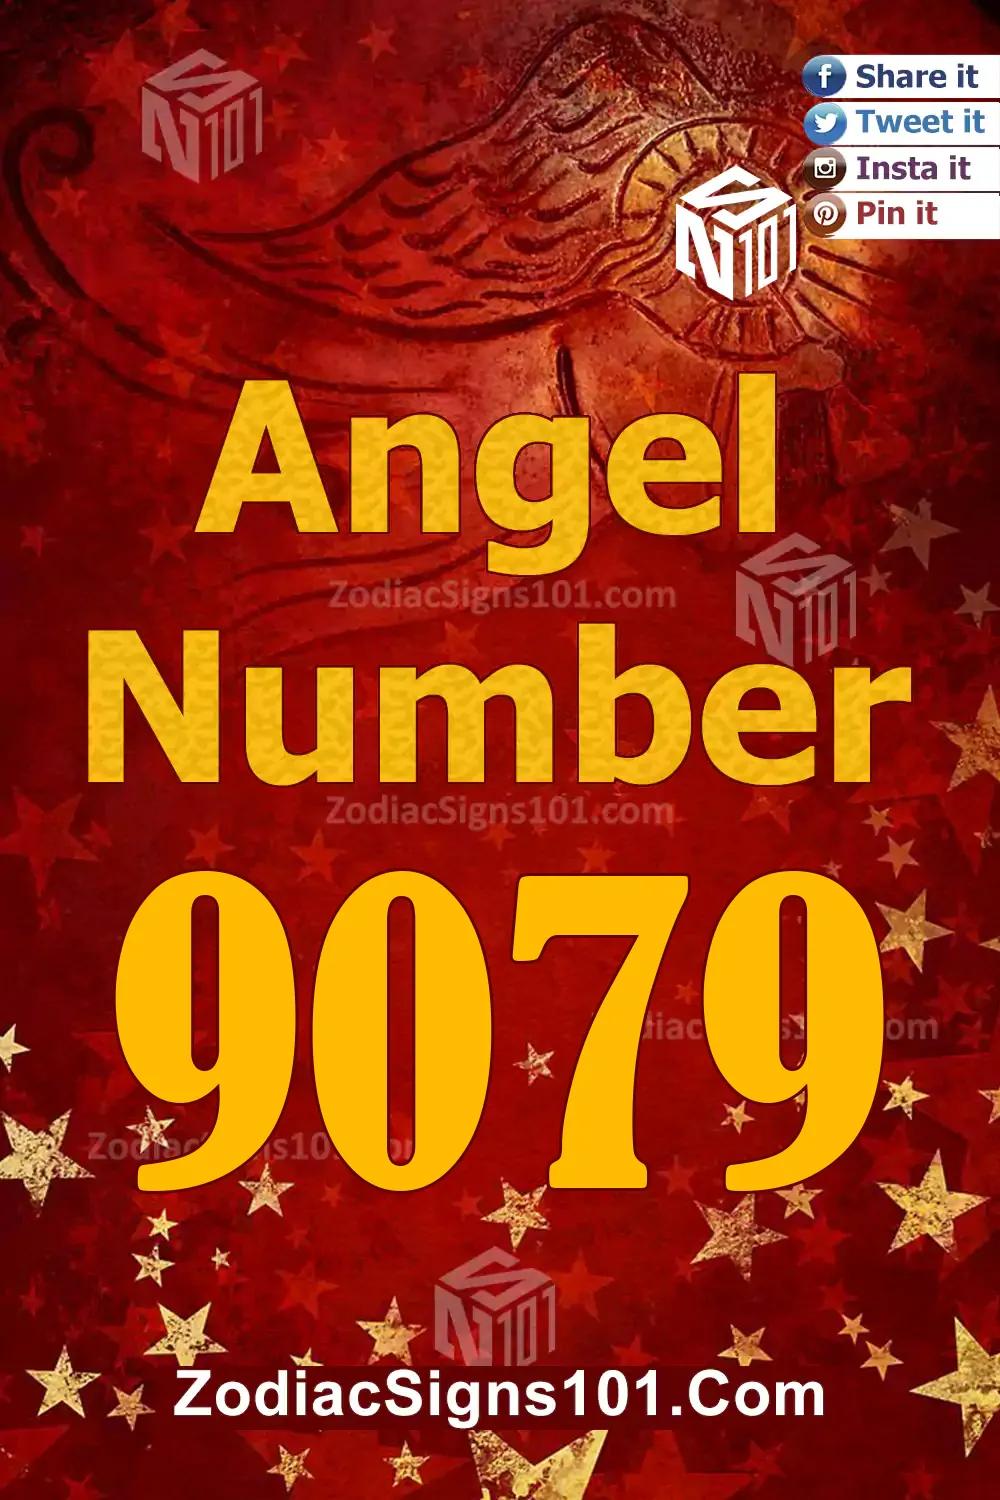 9079 Angel Number Meaning